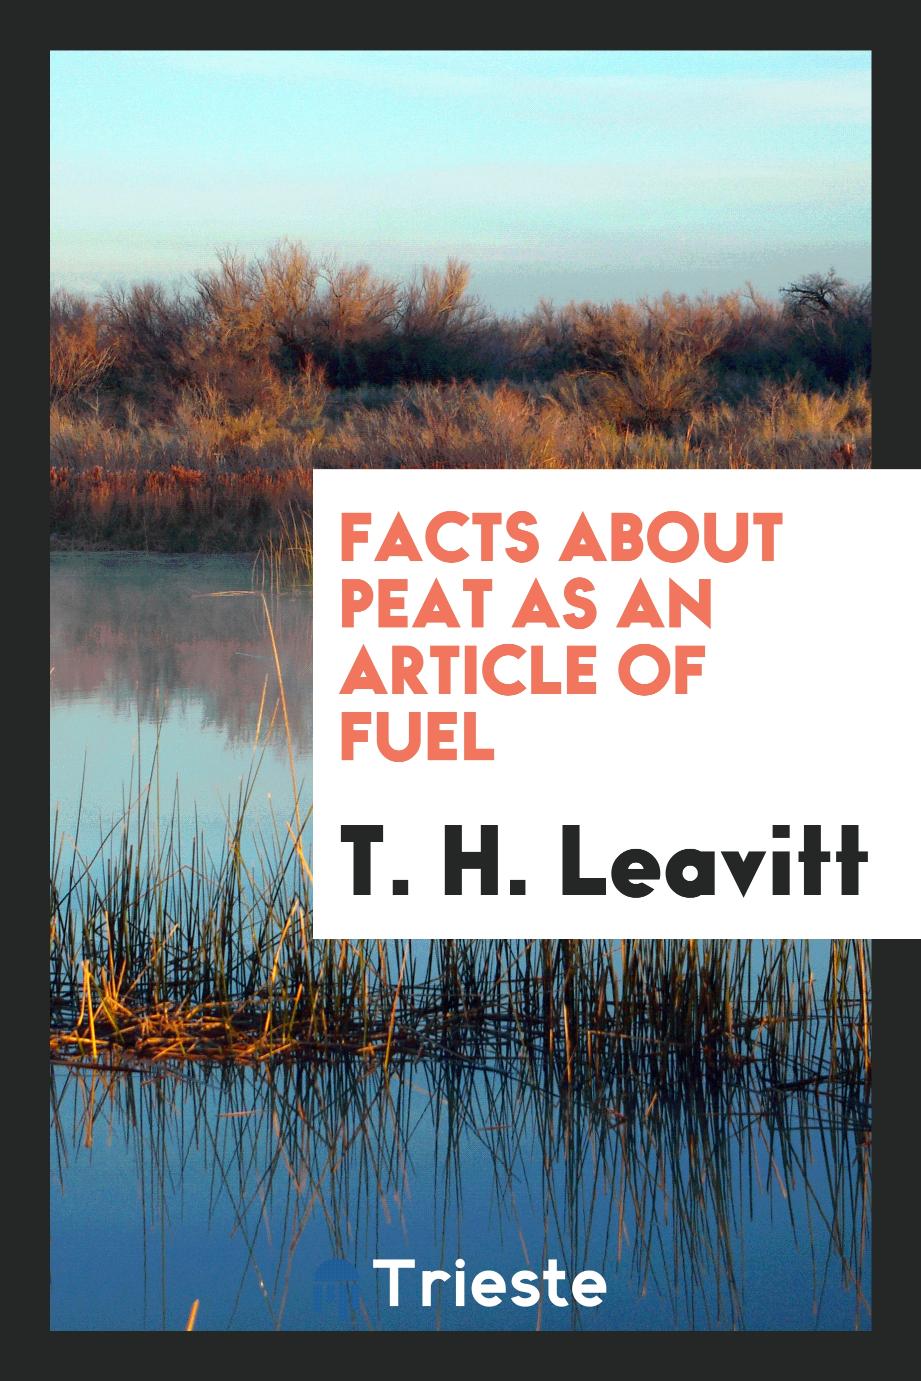 Facts About Peat as an Article of Fuel